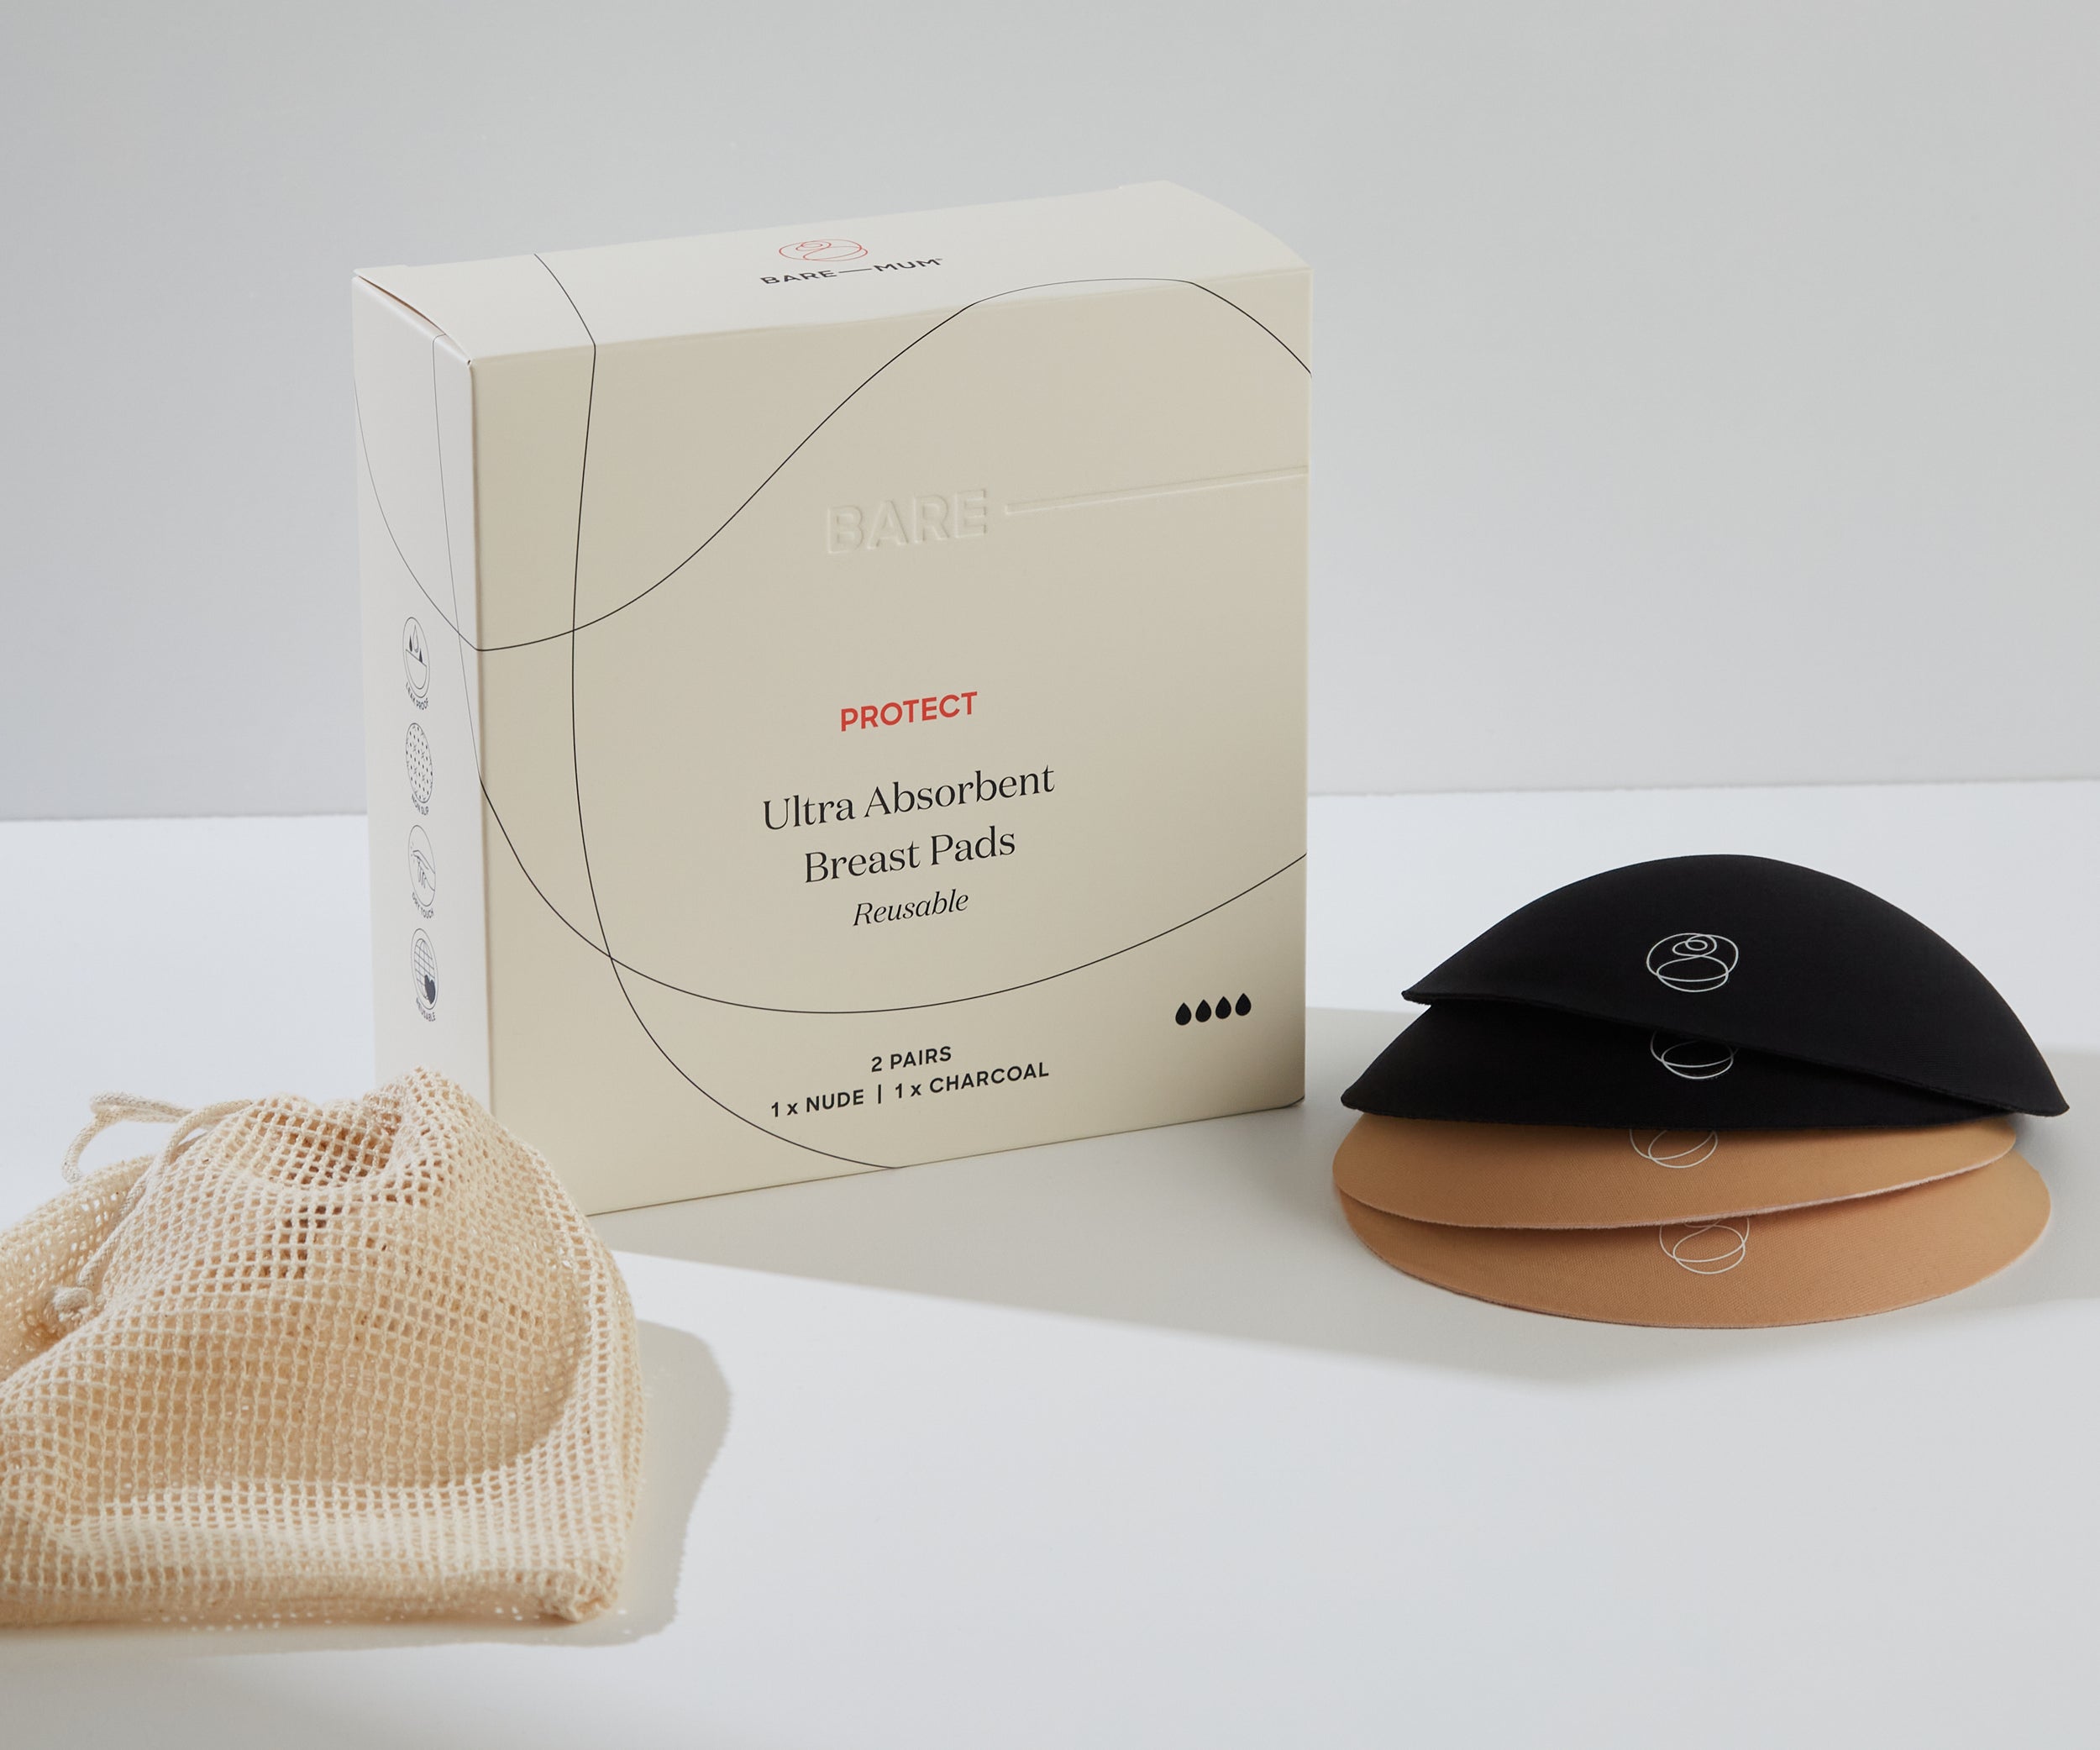 Ultra Absorbent Breast Pads